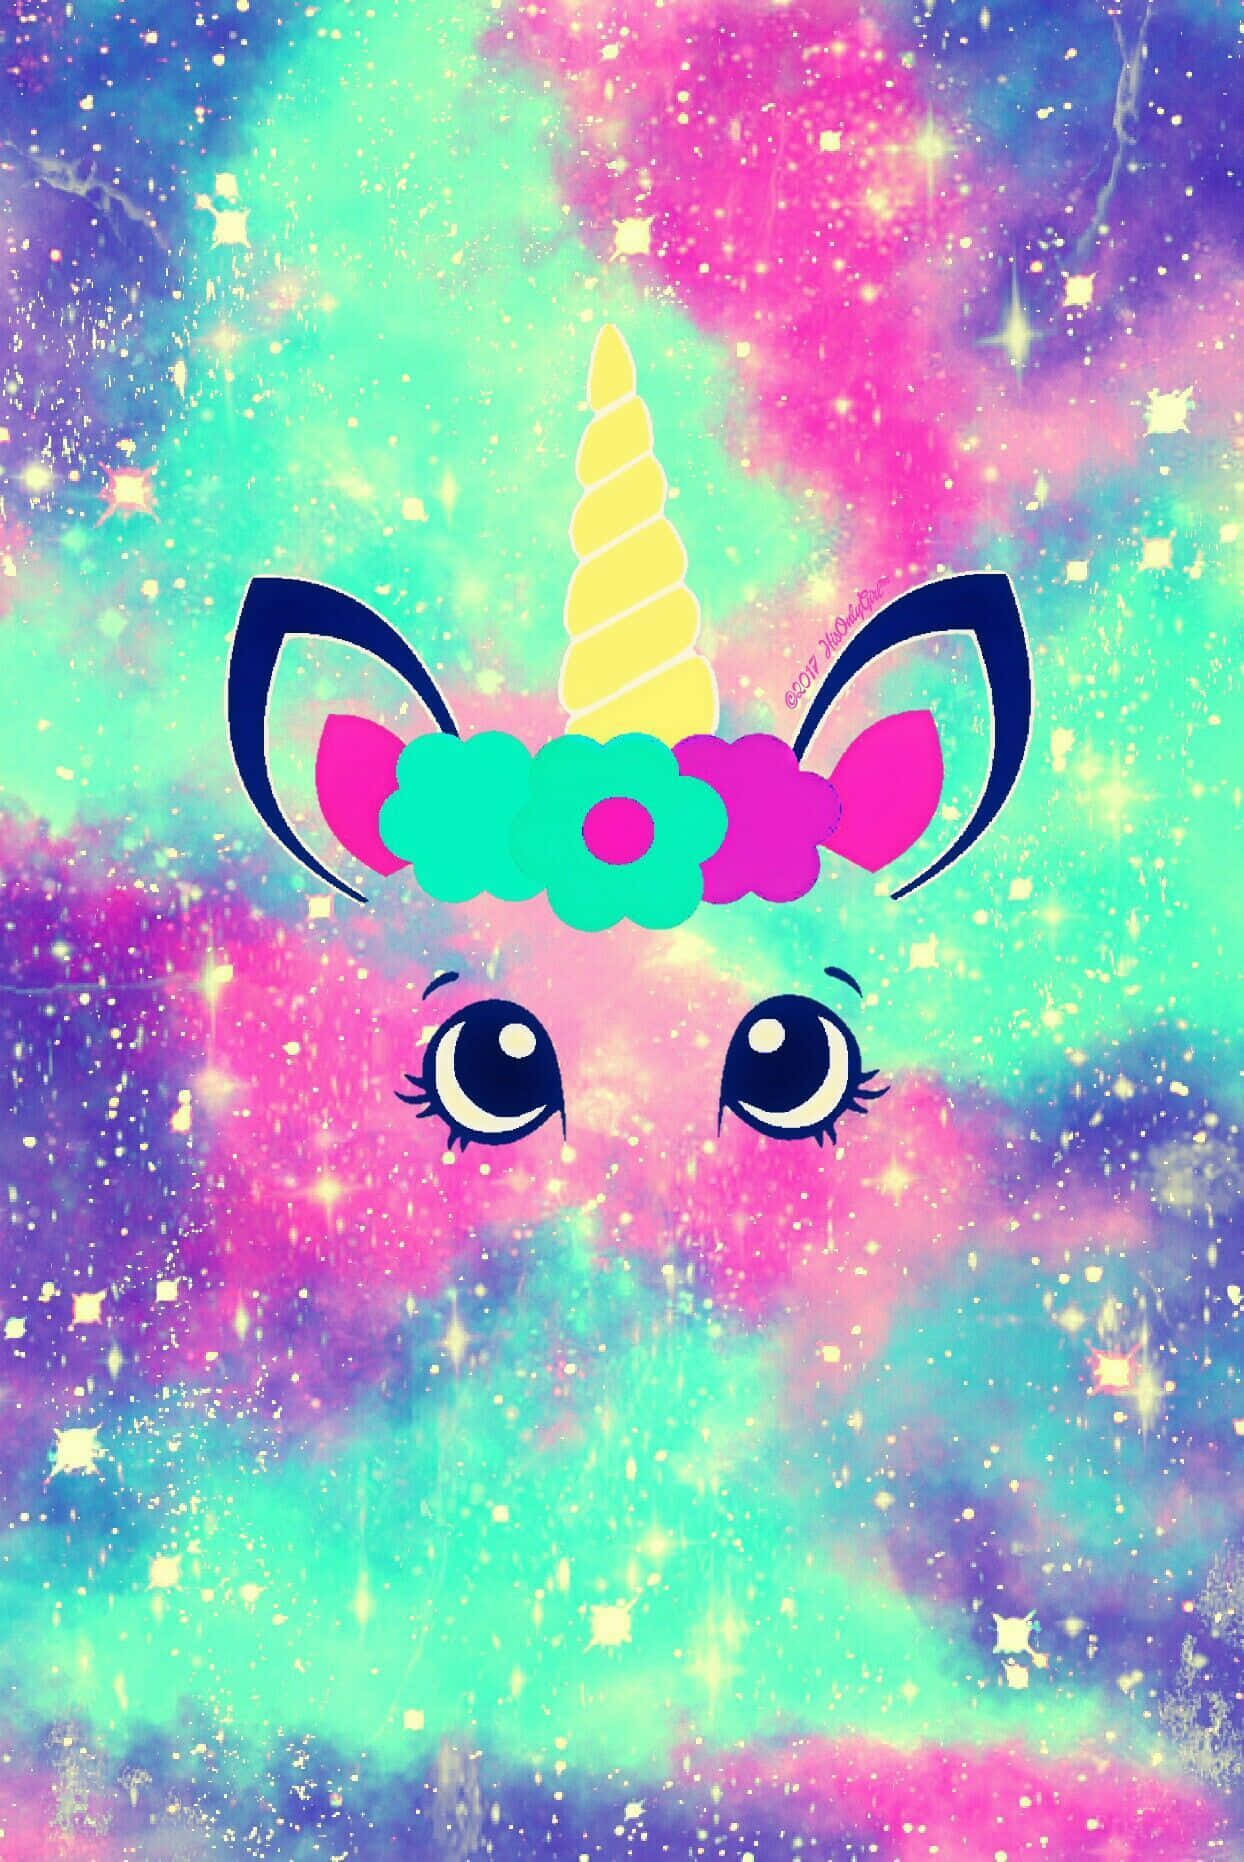 Explore the wonders of the universe with Kawaii Galaxy. Wallpaper